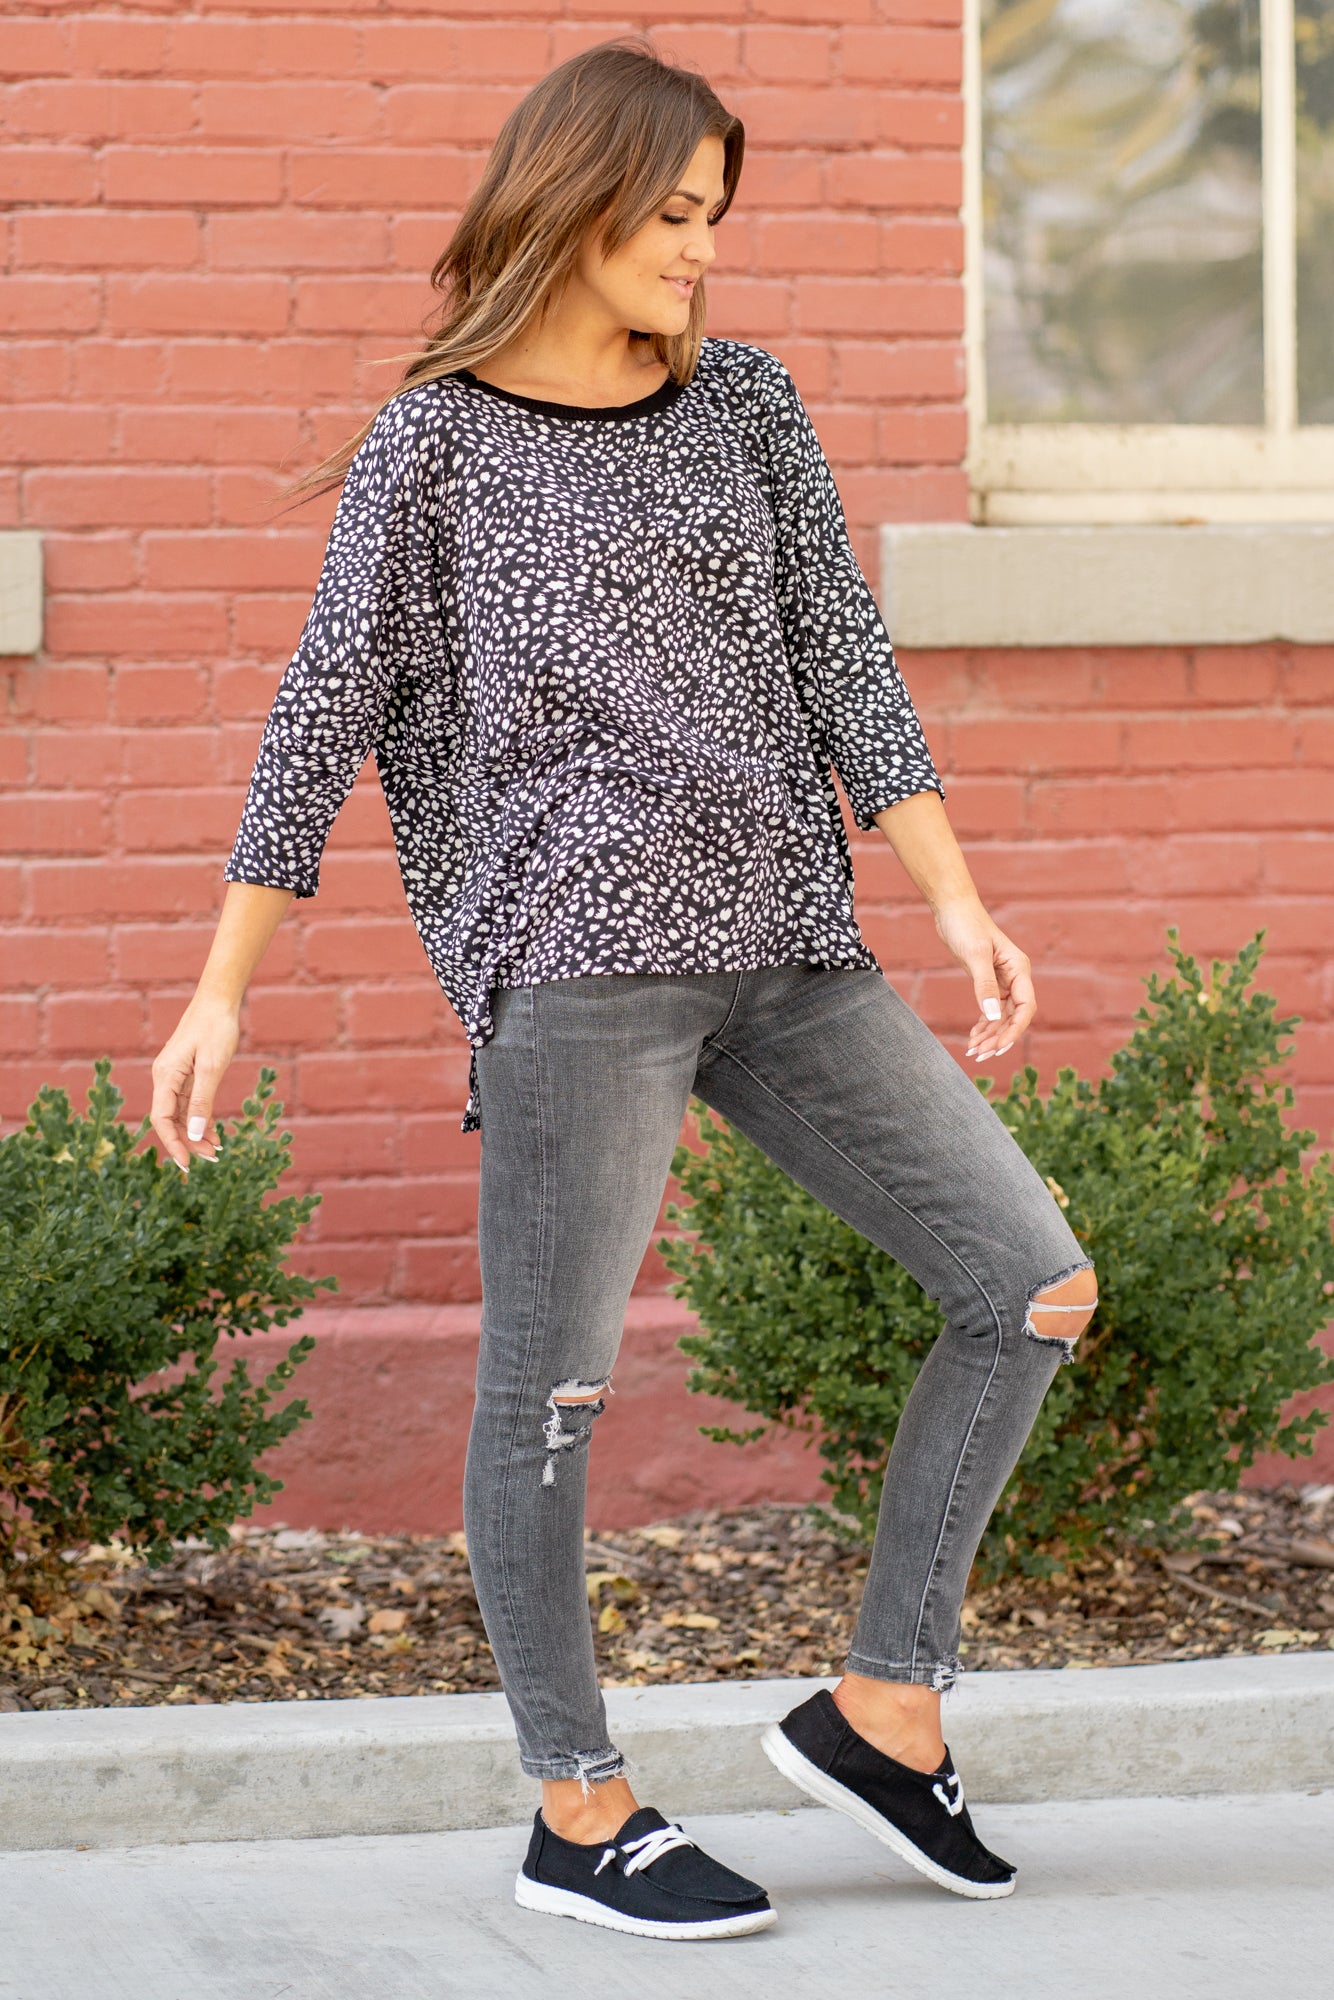 Hem & Thread   Feel comfortable and cute in this leopard knit top. Pair with your favorite jeans and booties for an early fall vibe.   Neckline: Round Neck Sleeve: Mid Length Style #: 31014F-Black Contact us for any additional measurements or sizing.   